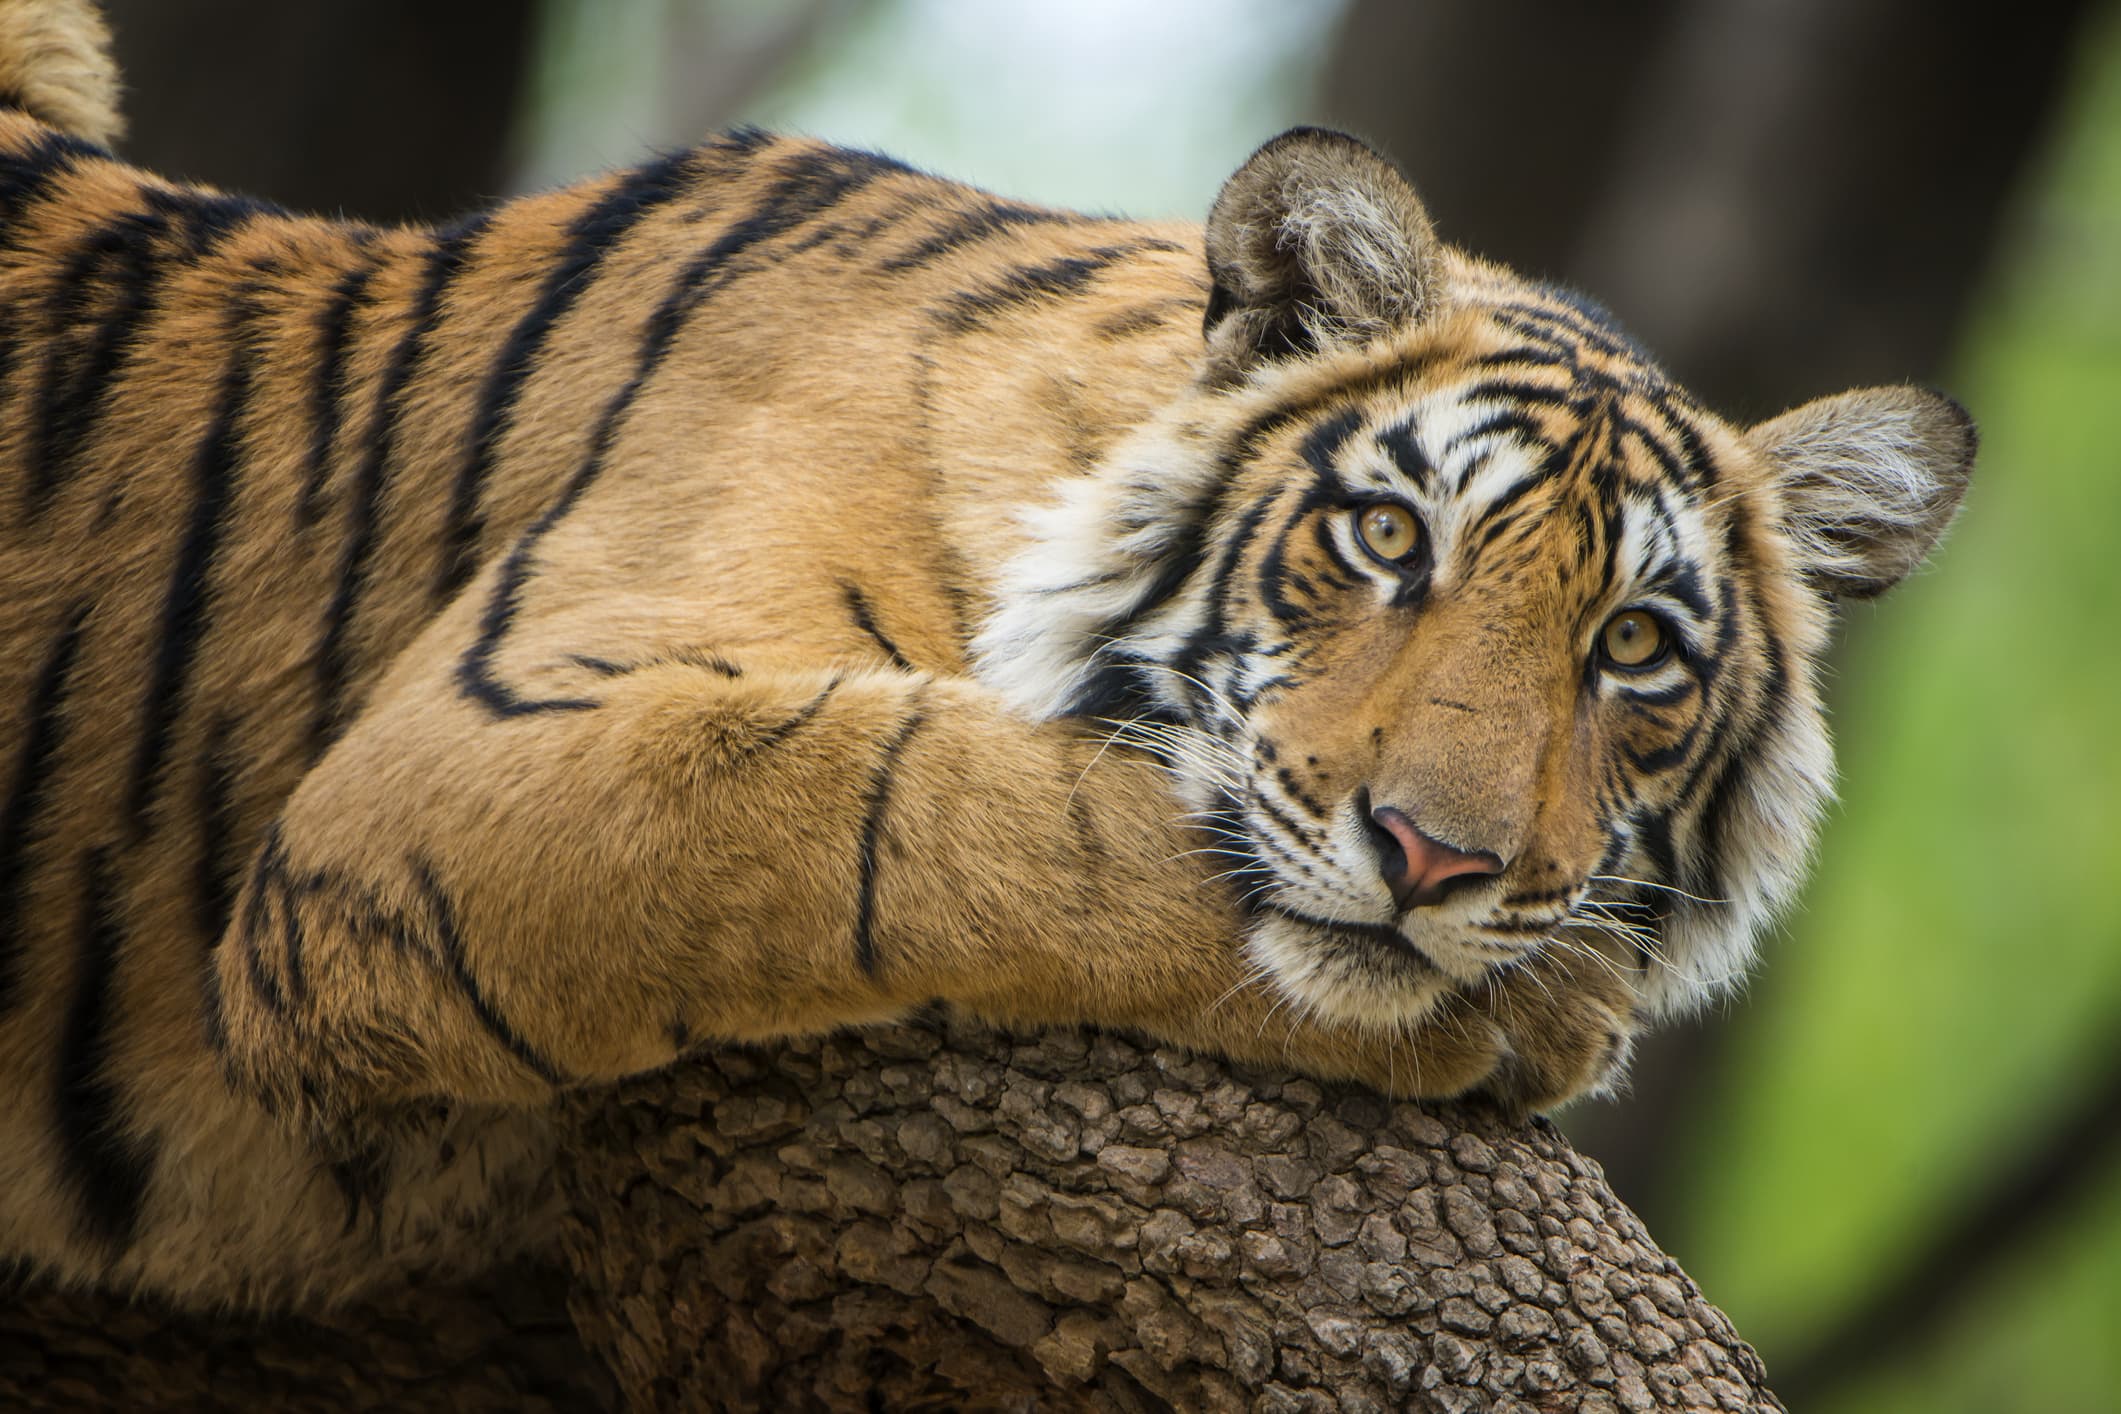 How to see tigers in India at Ranthambore National Park